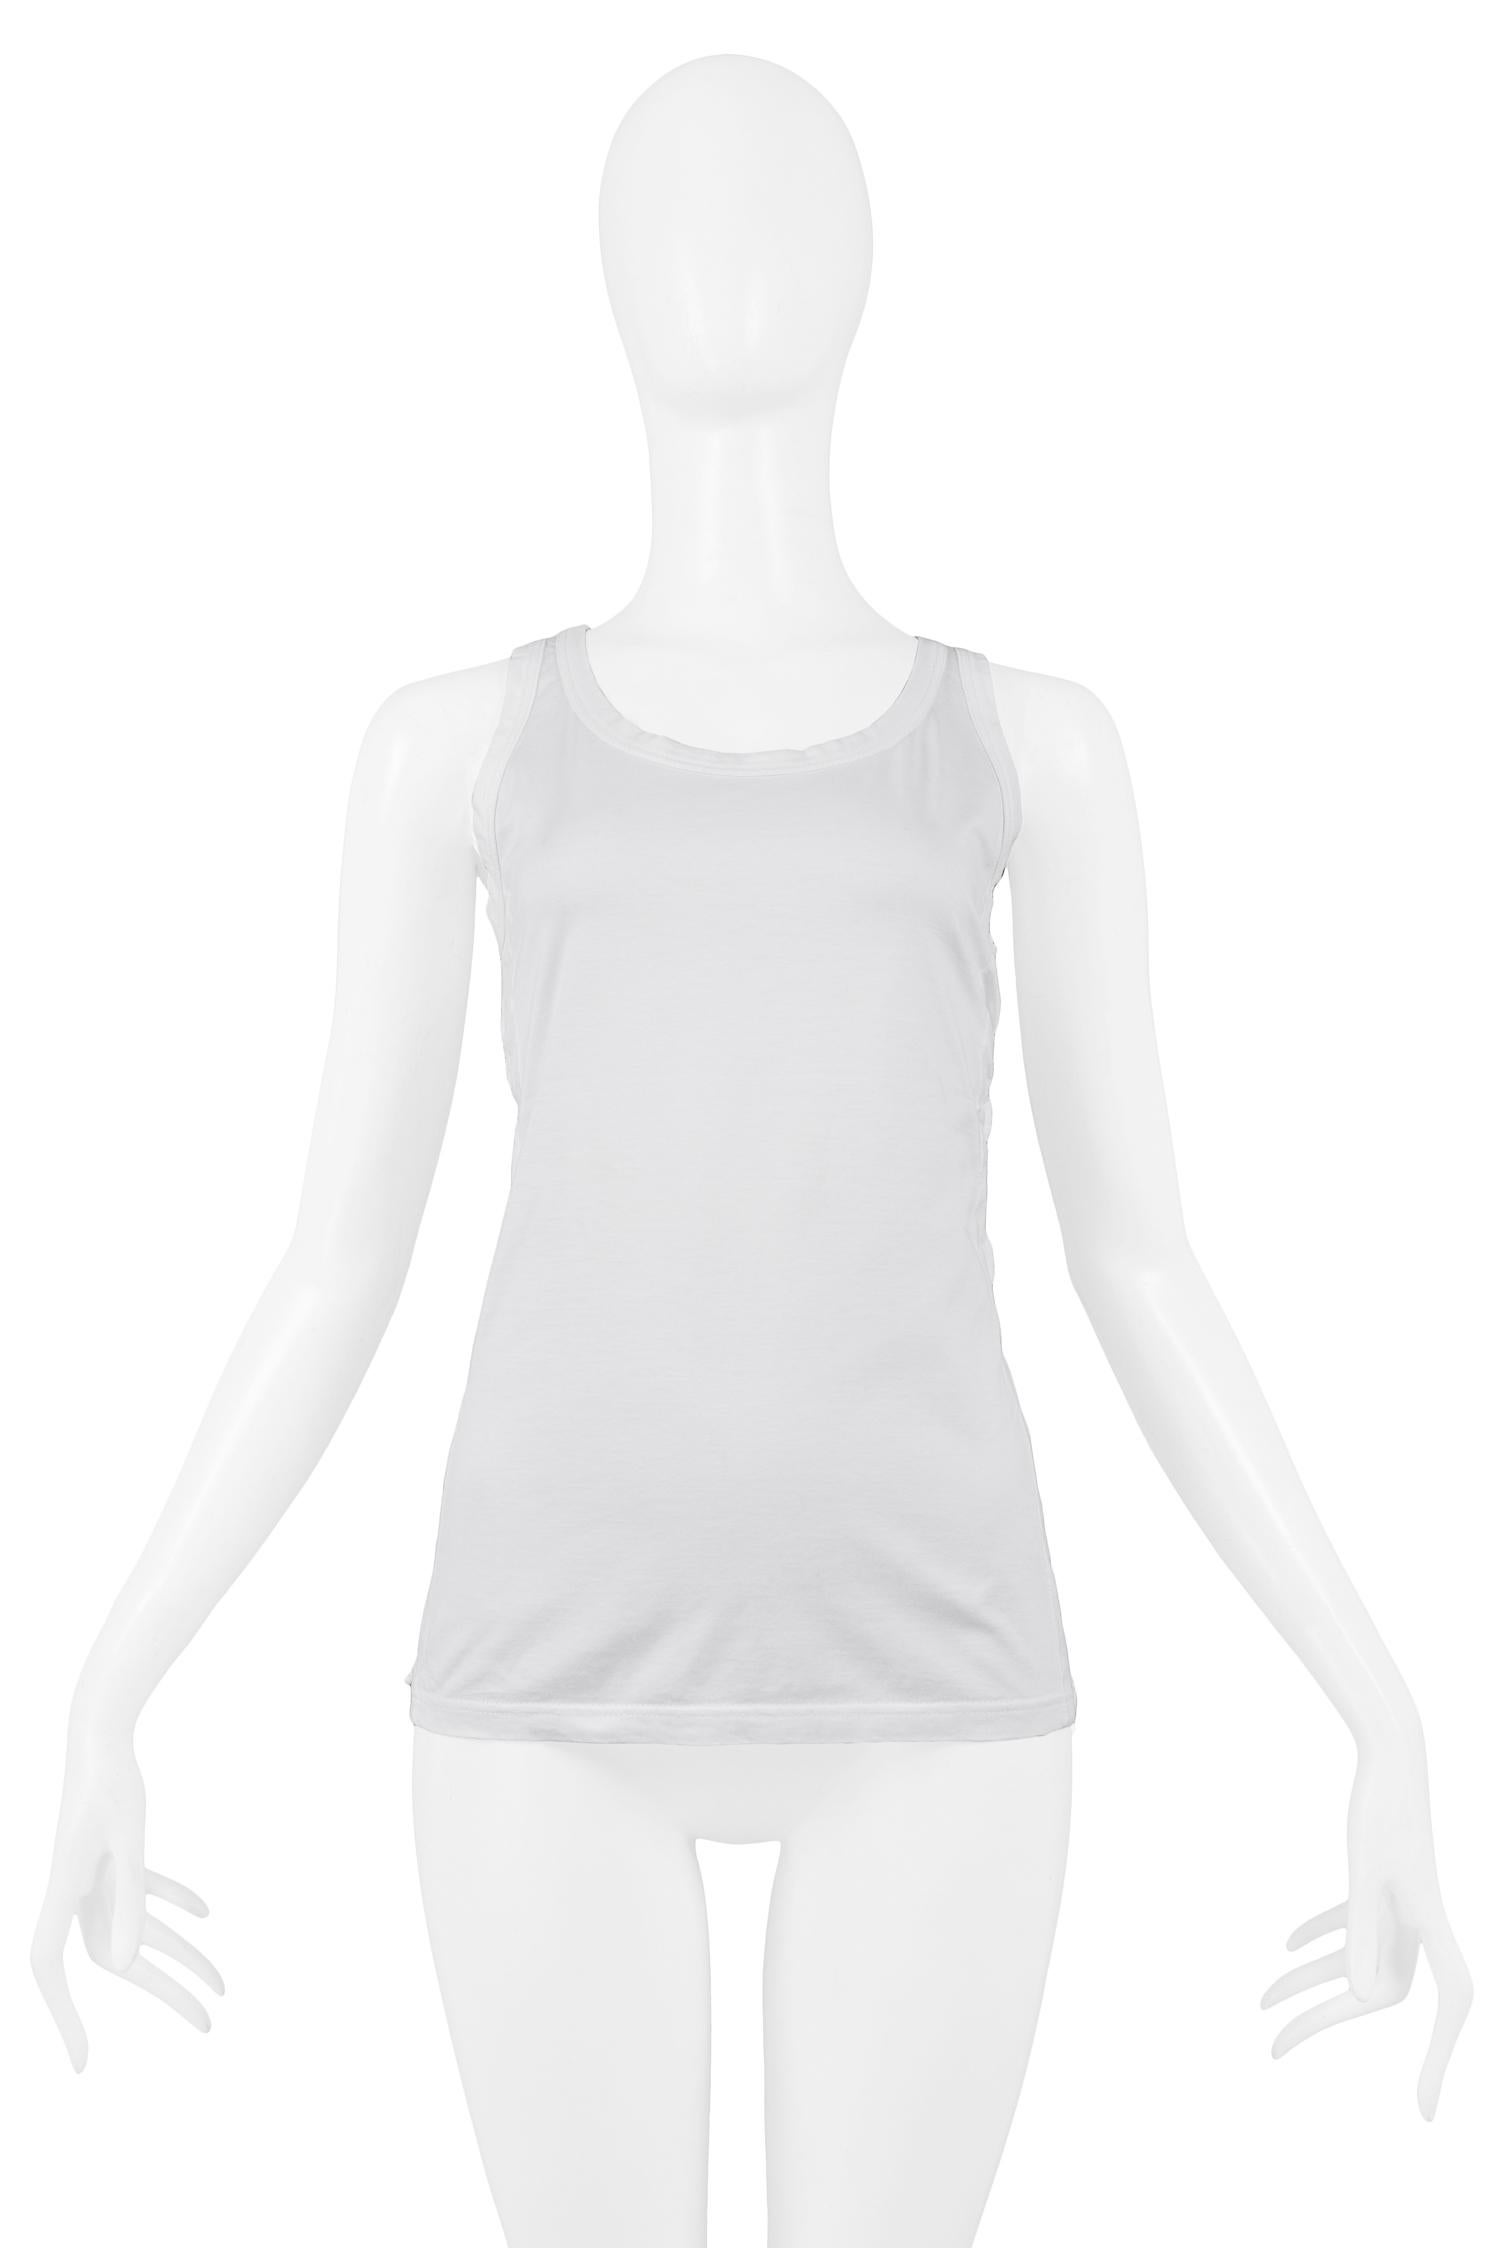 Vintage Helmut Lang white cotton tank top with lacing at sides. Collection 2001.

Excellent Vintage Condition.

Size 42